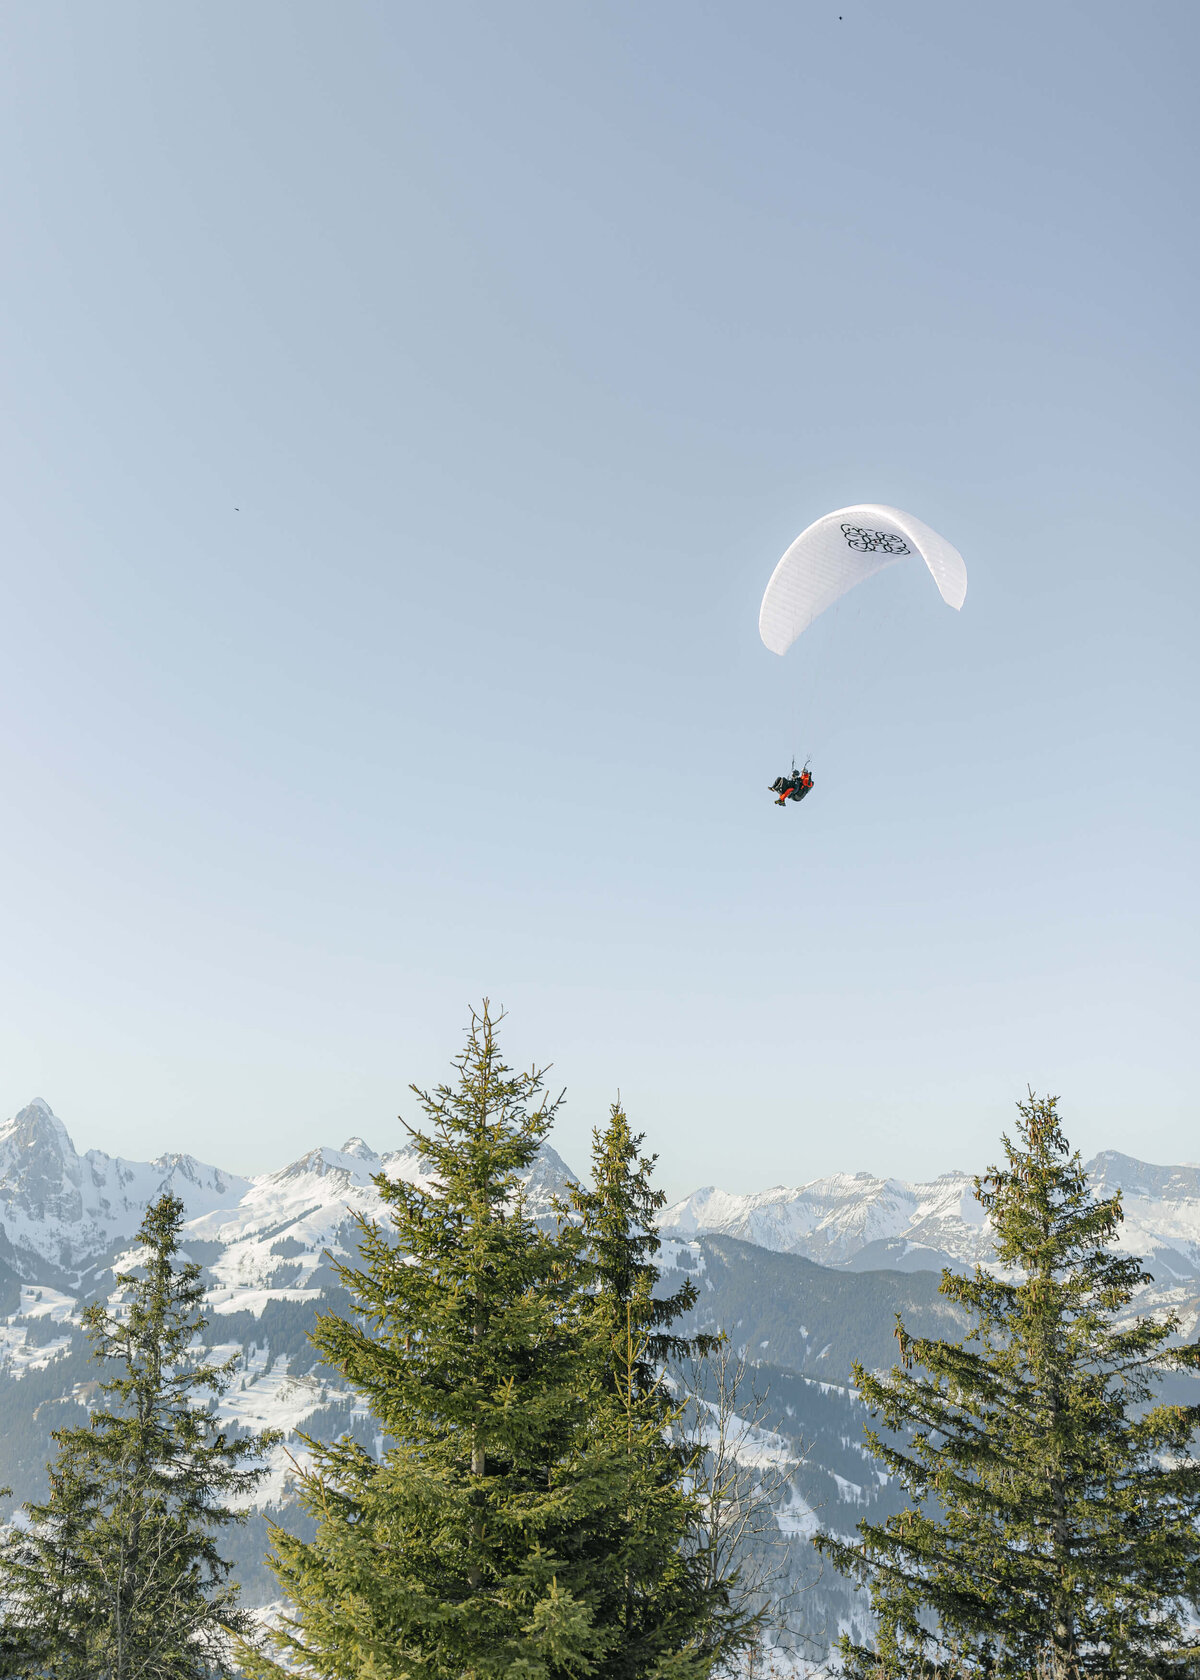 chloe-winstanley-events-gstaad-mountain-tandem-paragliding